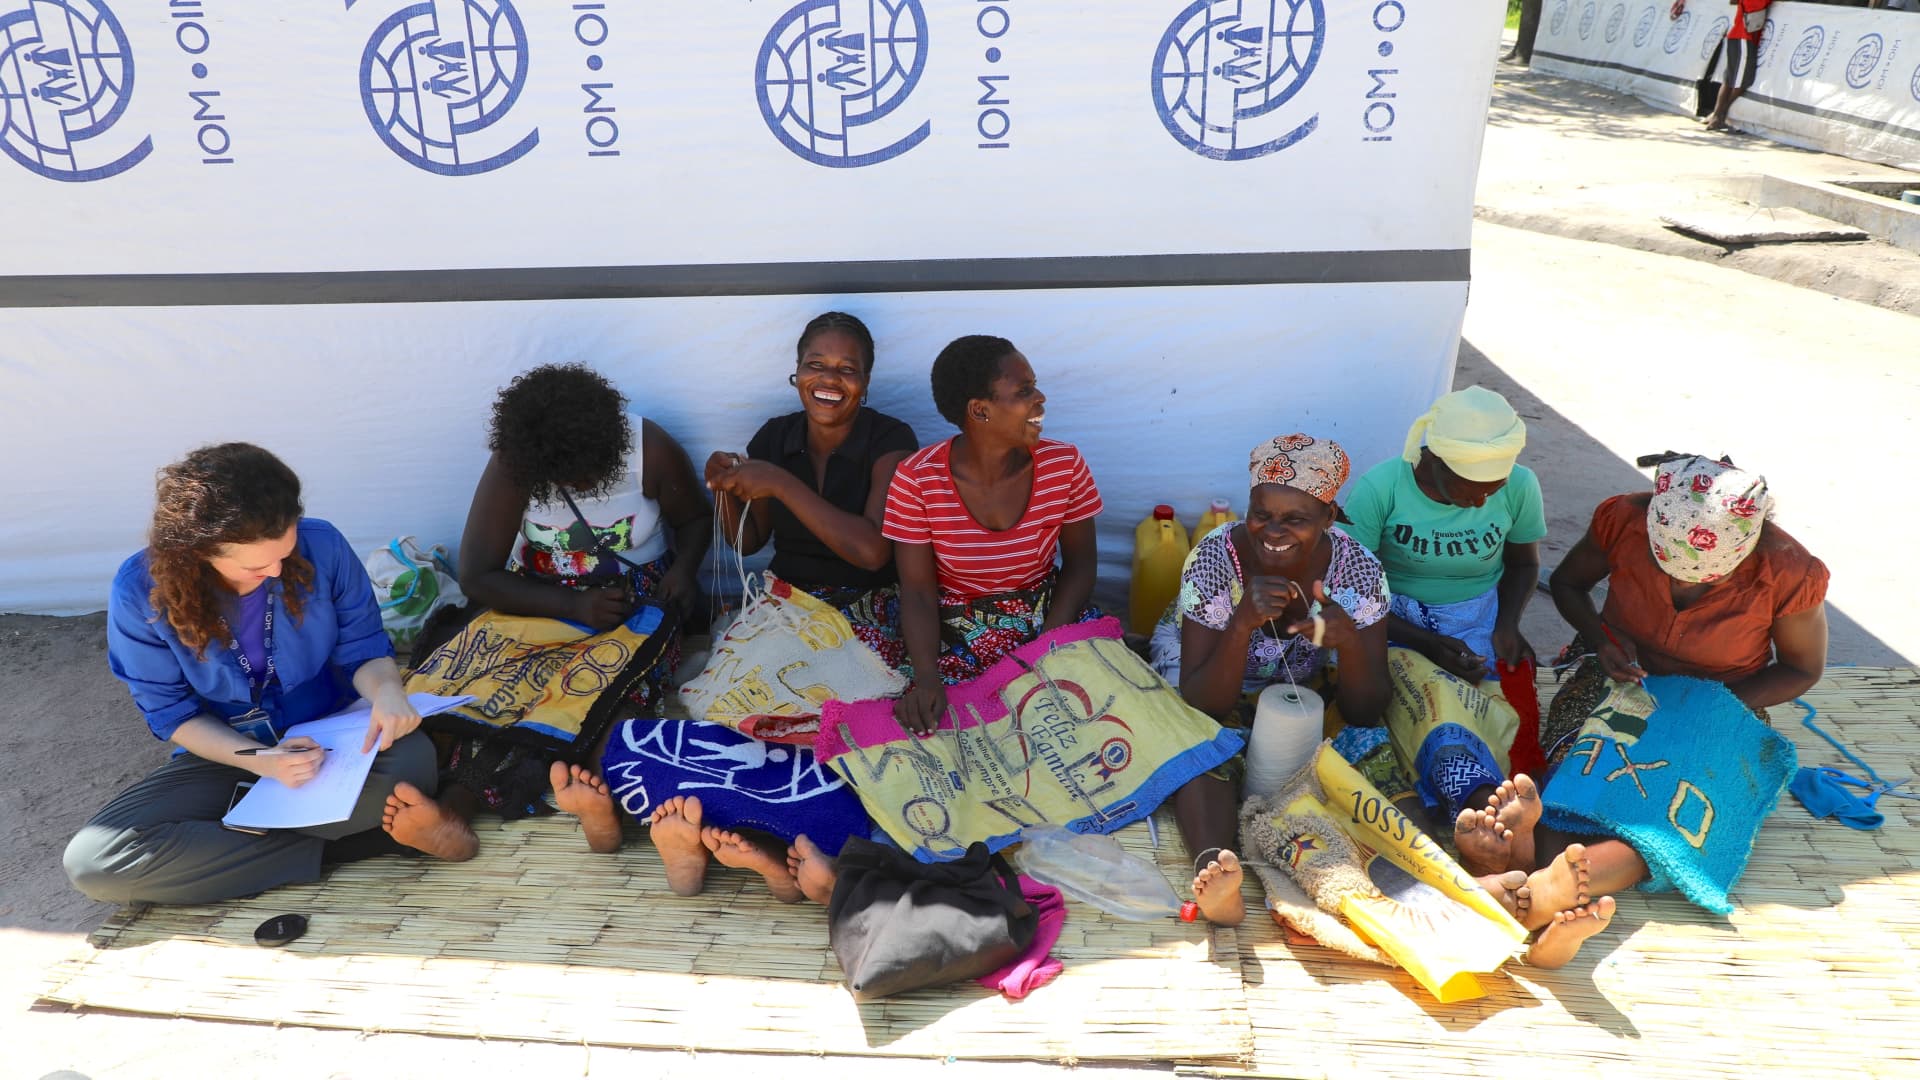 Sandra Black (left) with women participating in a carpet-making project in a resettlement site after Cyclone Idai hit Mozambique in 2019.